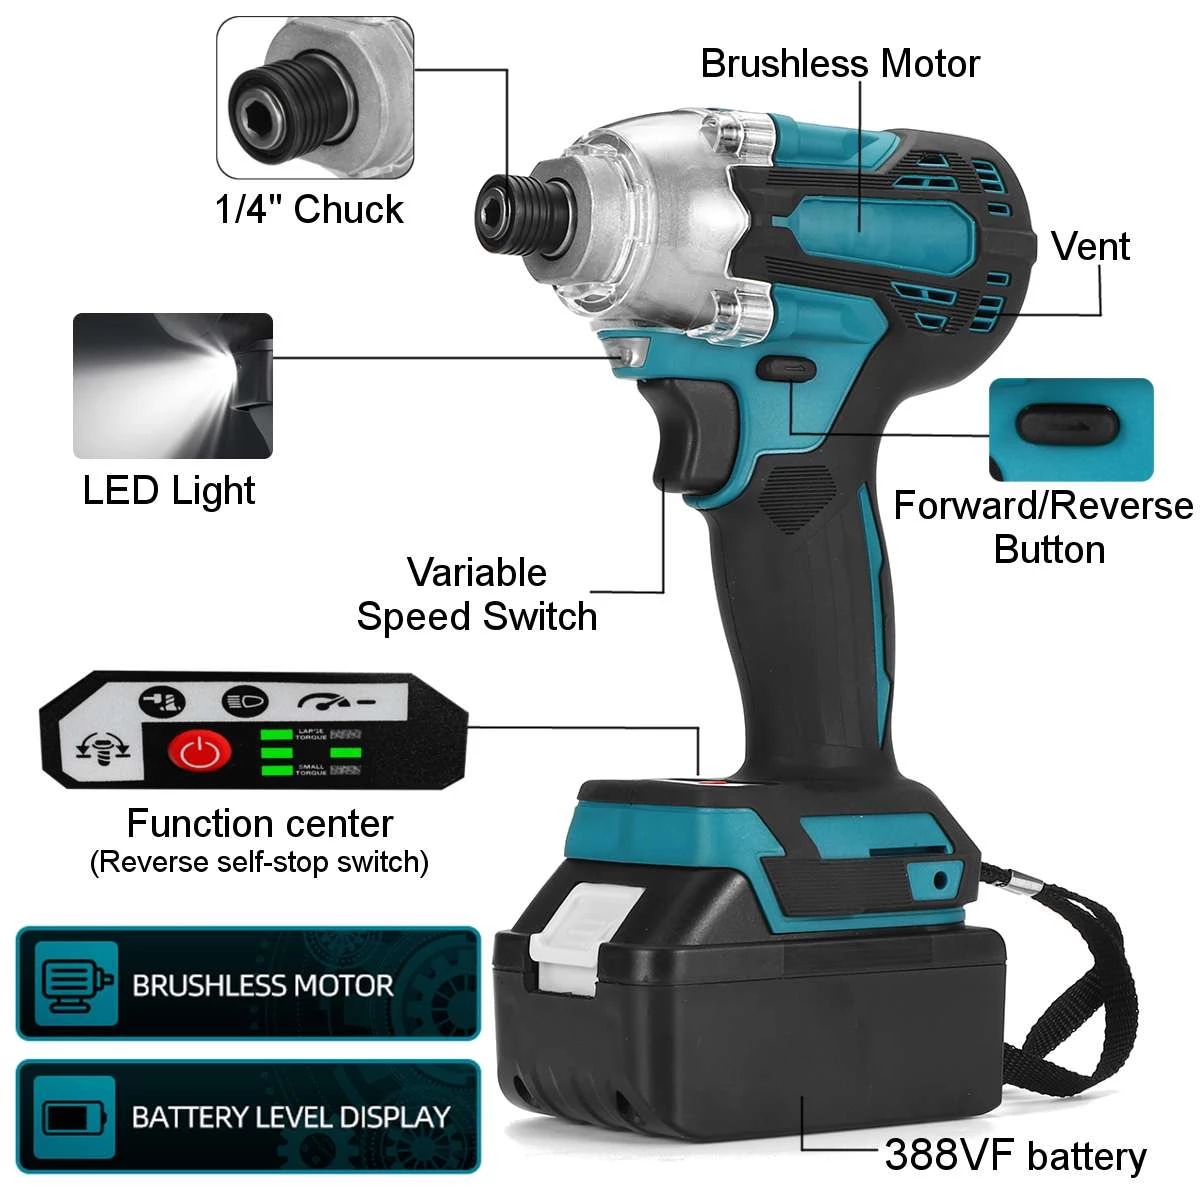 350NM-18V-Brushless-Cordless-Electric-Impact-Wrench-Driver-Screwdriver-Power-Tools-W-None12-Battery--1878641-7